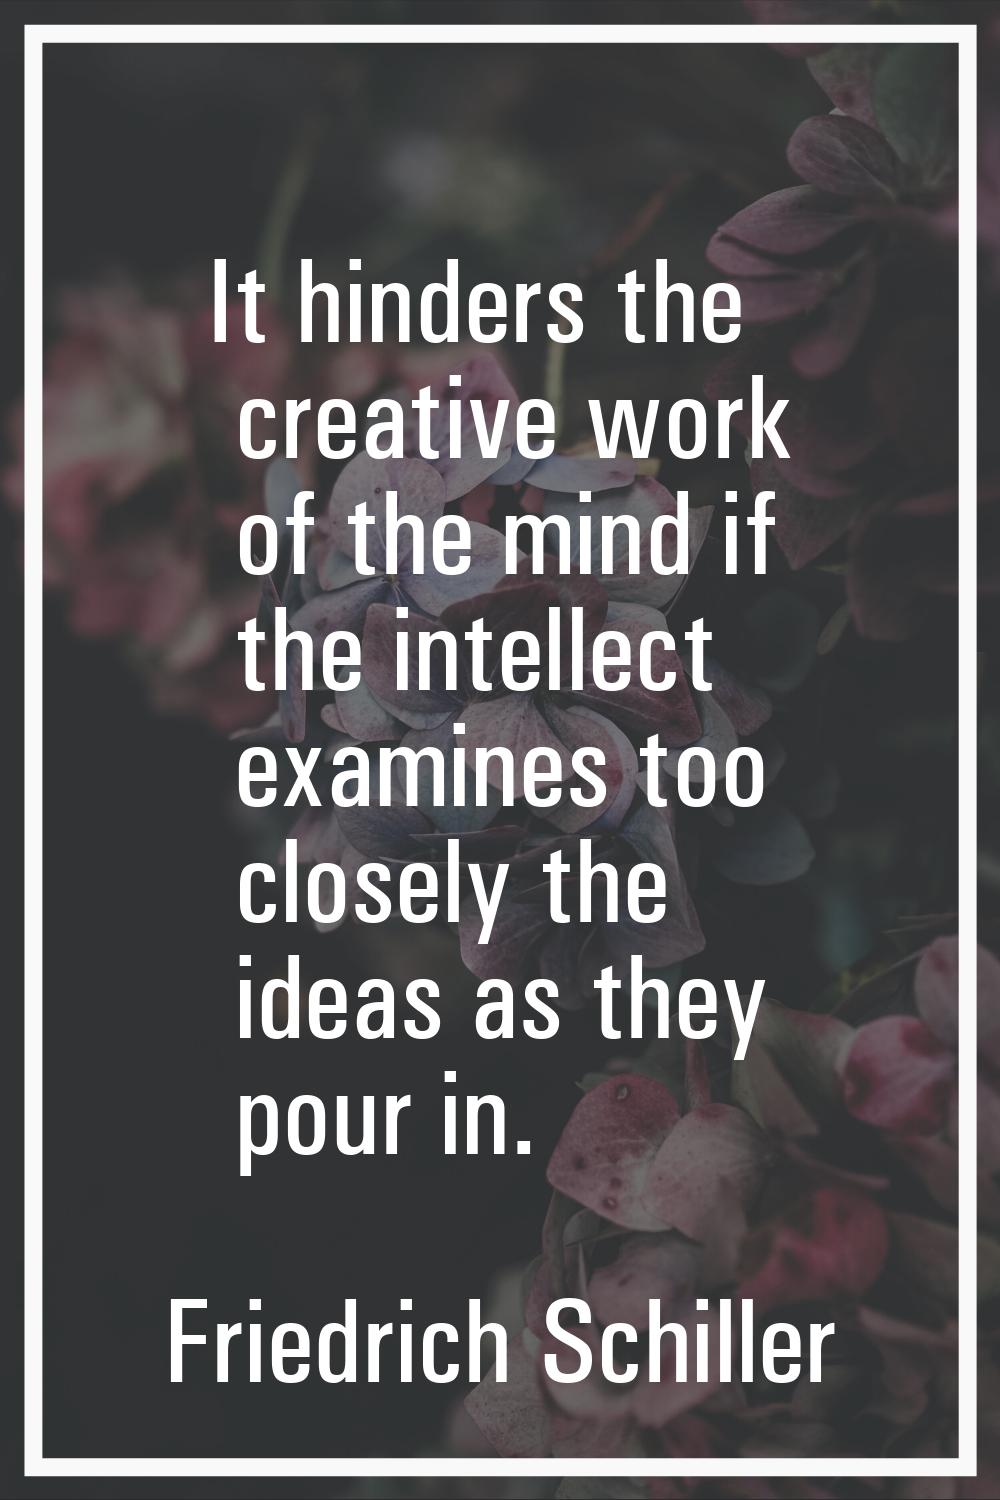 It hinders the creative work of the mind if the intellect examines too closely the ideas as they po